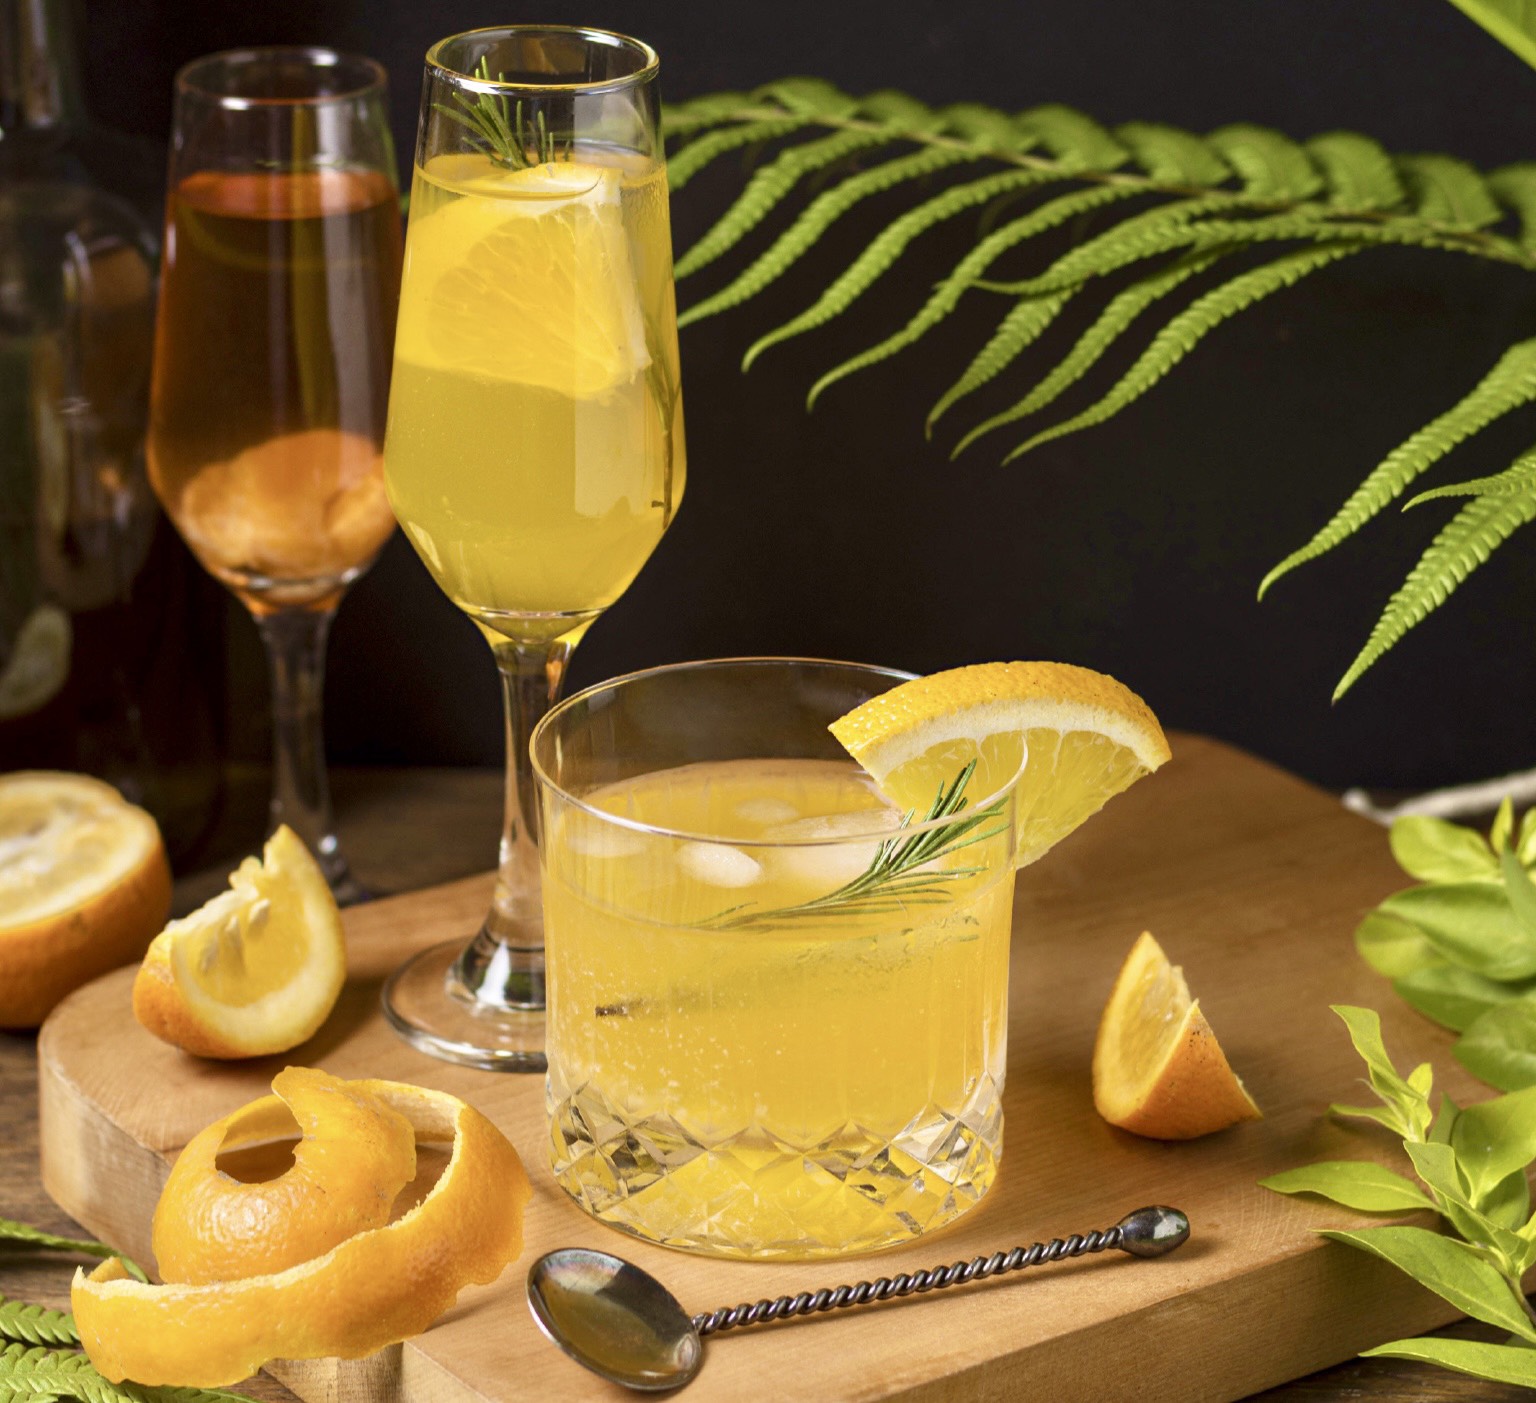 HAPPY HOURS – The Golden Time to Savor Delicious Drinks